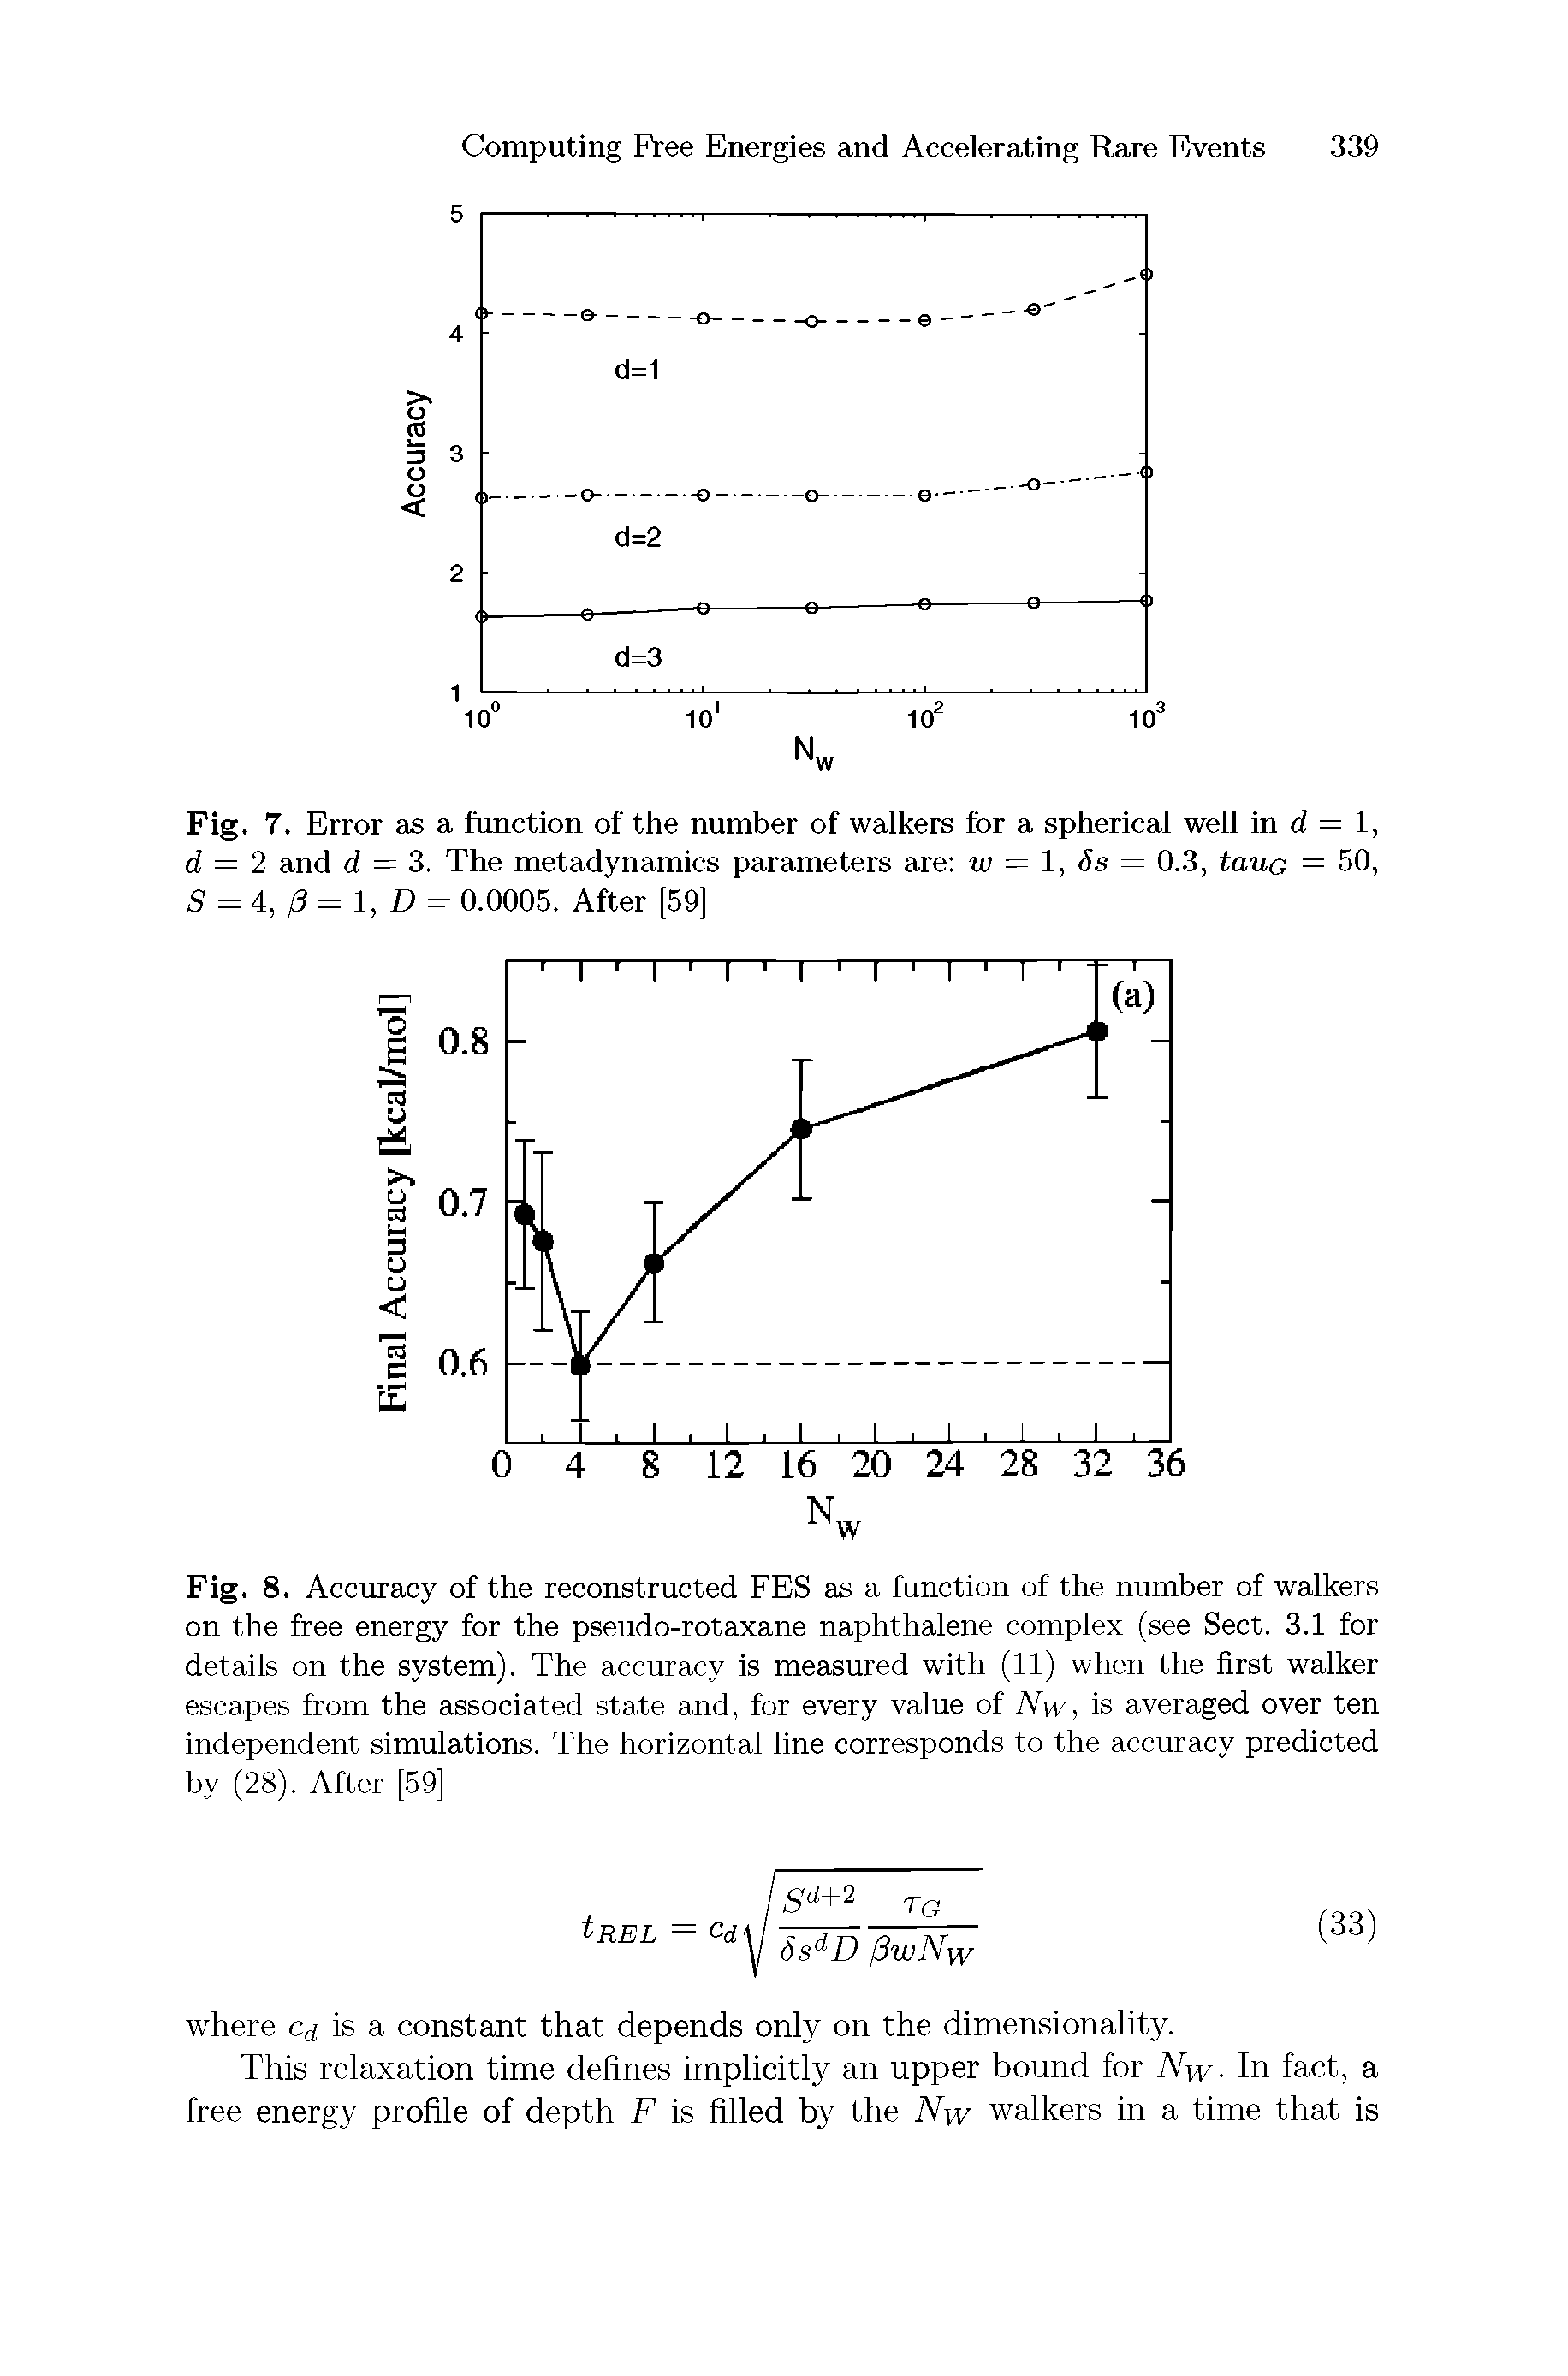 Fig. 8. Accuracy of the reconstructed FES as a function of the number of walkers on the free energy for the pseudo-rotaxane naphthalene complex (see Sect. 3.1 for details on the system). The accuracy is measured with (11) when the first walker escapes from the associated state and, for every value of Nw, is averaged over ten independent simulations. The horizontal line corresponds to the accuracy predicted by (28). After [59]...